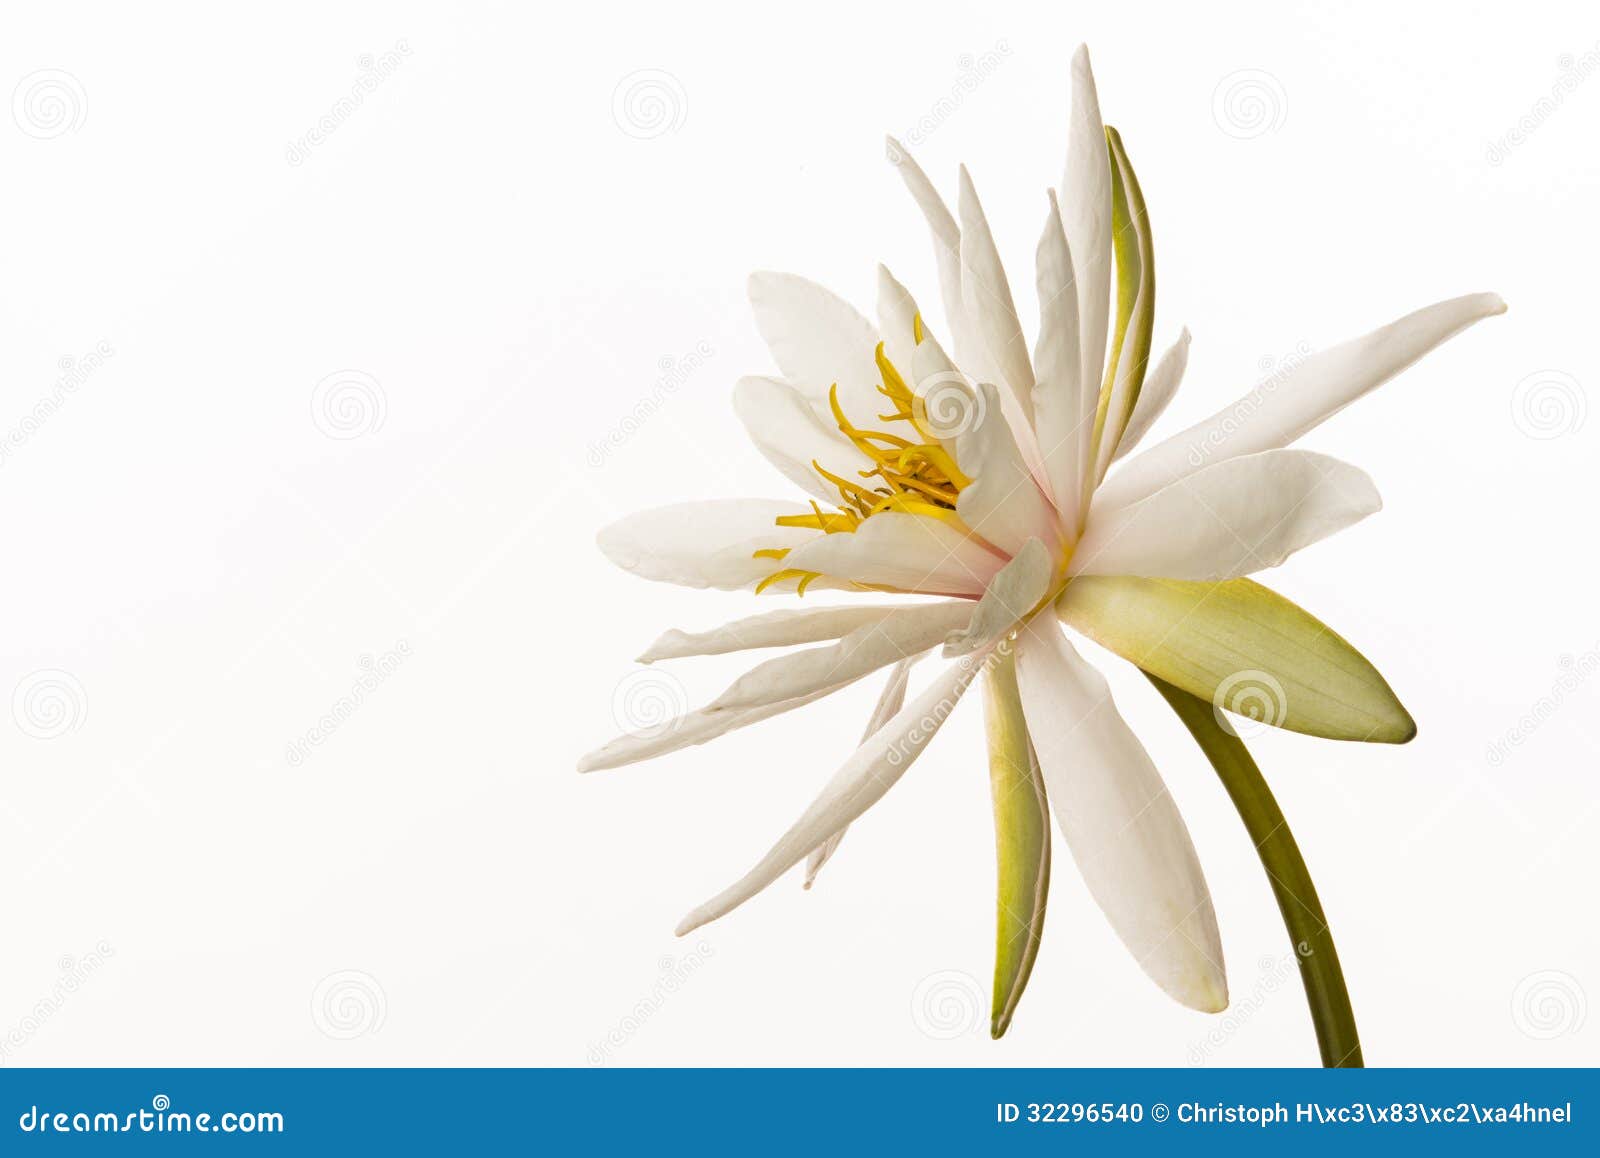 Water lily stock photo. Image of white, beauty, wedding - 32296540